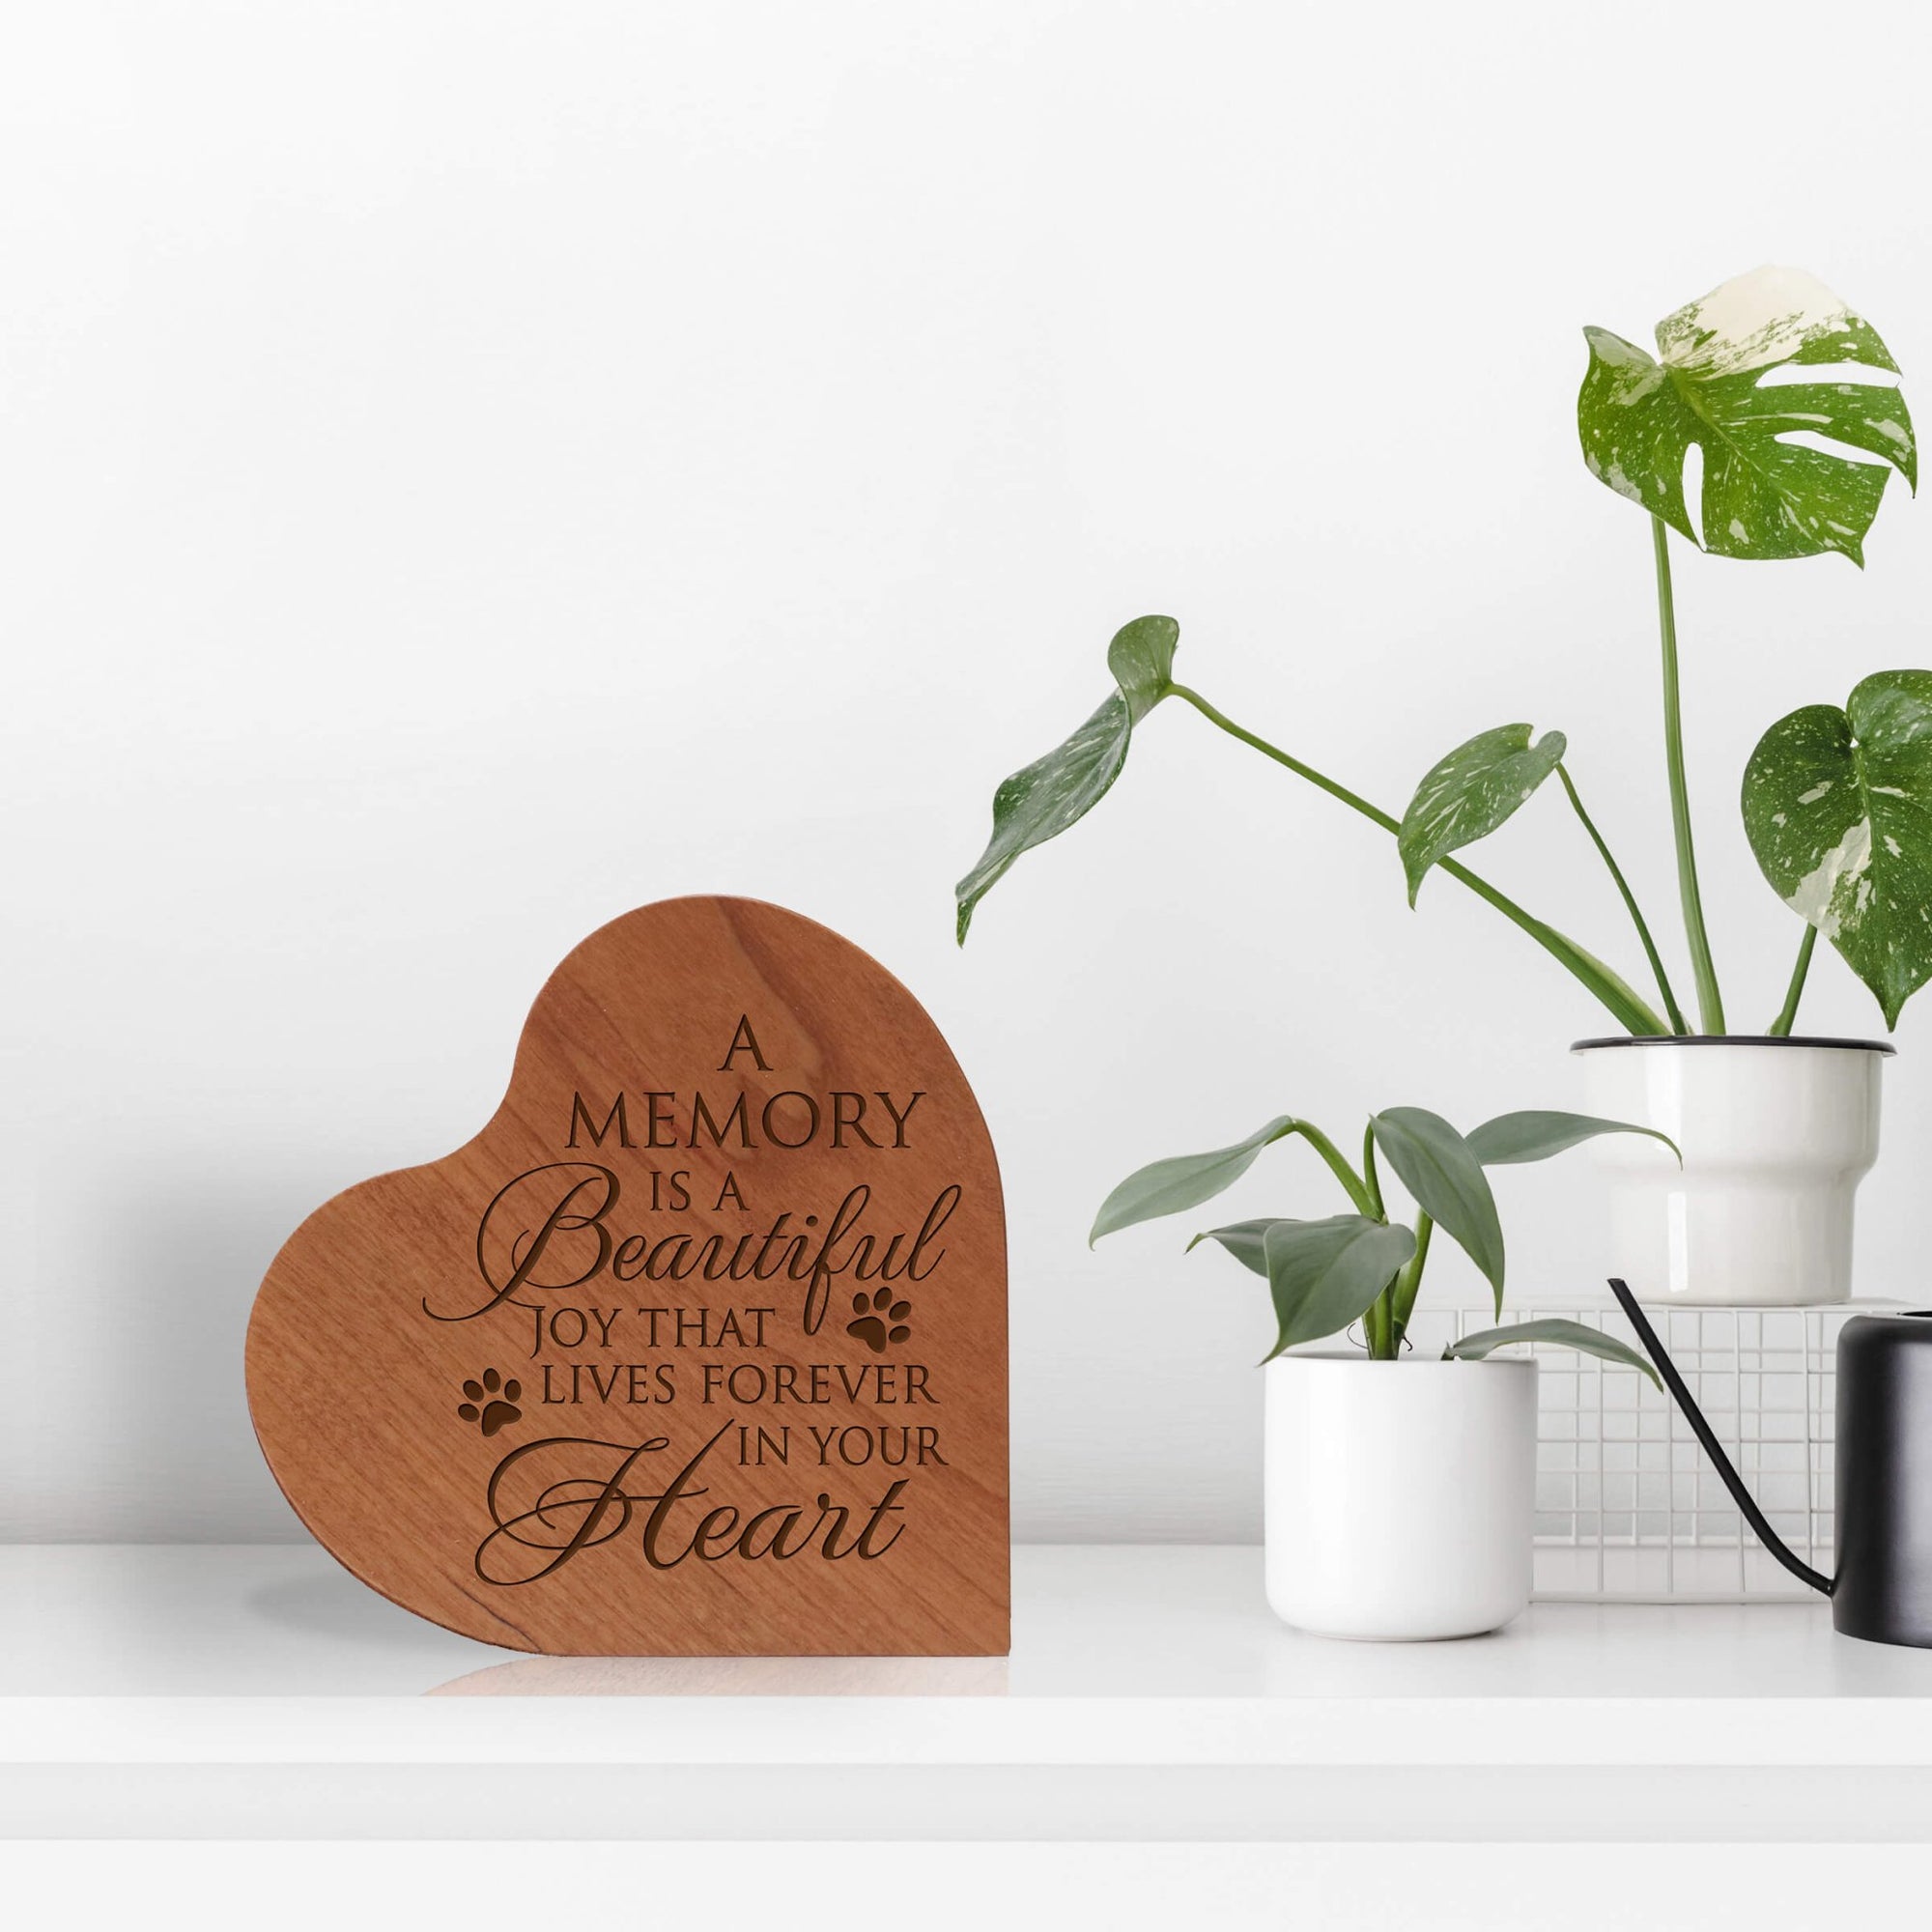 Personalized Small Heart Cremation Urn Keepsake For Pet Ashes - A Memory Is A Beautiful Joy - LifeSong Milestones